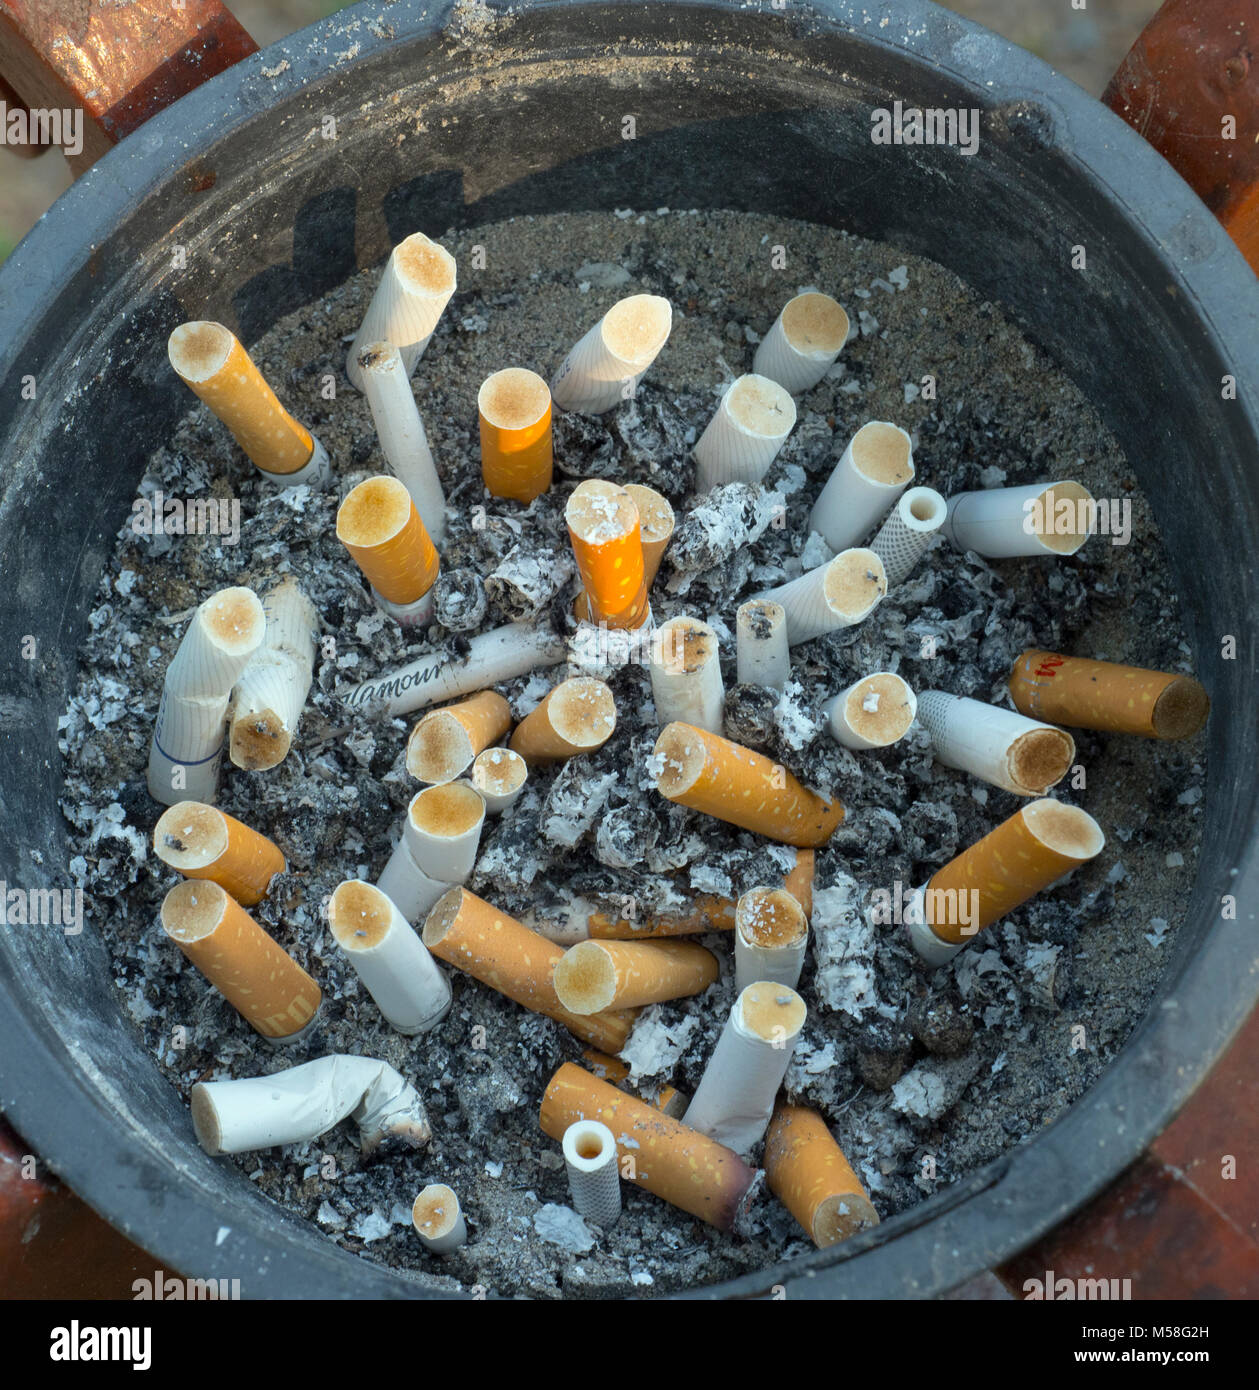 cigarette ends in ash tray in hotel smoking area Stock Photo